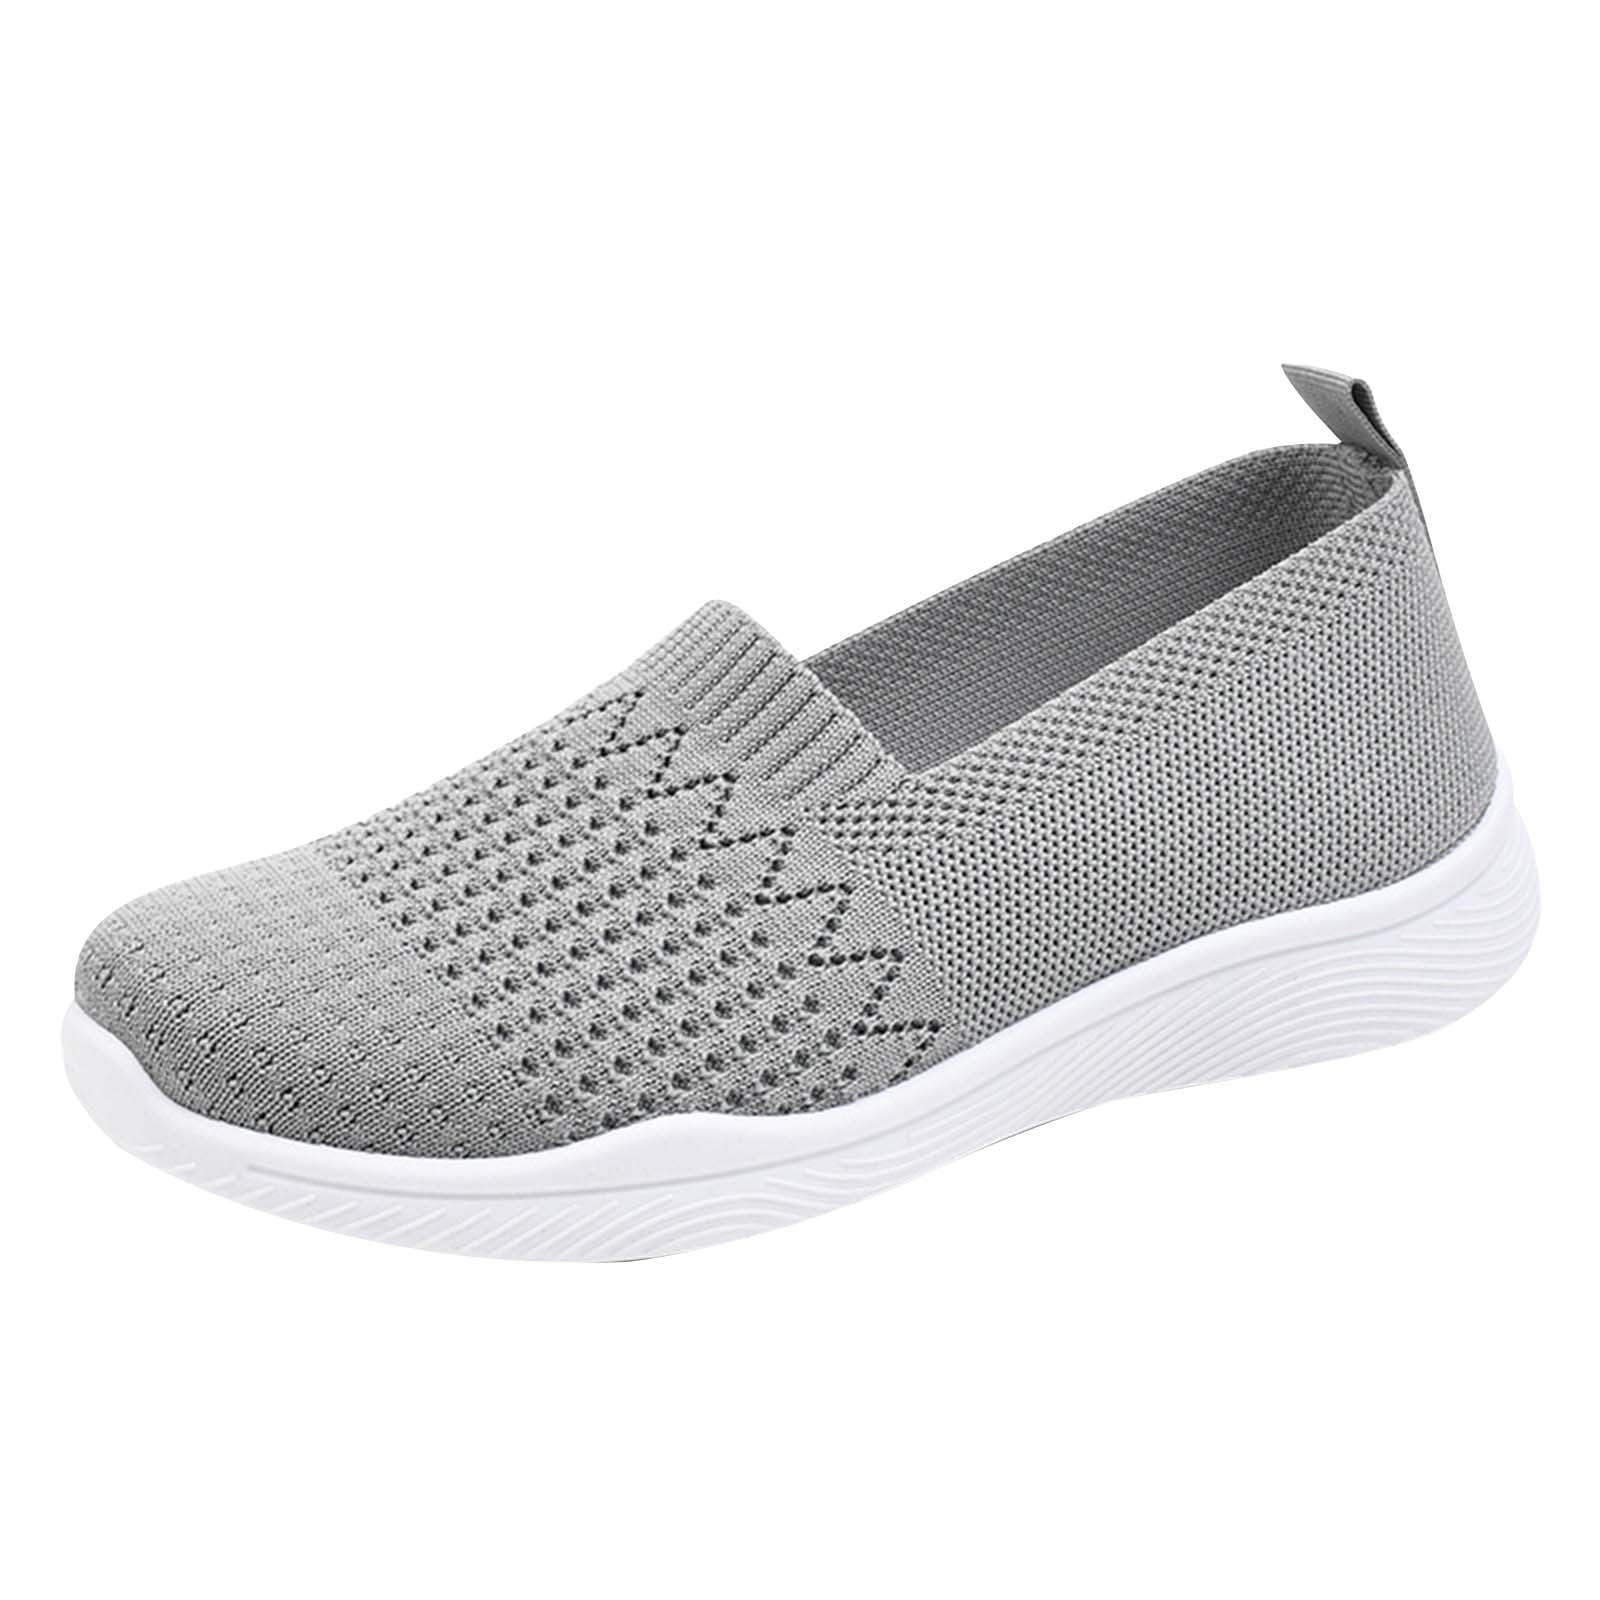 AnuirheiH Women Shoes Breathable Comfortable Casual Slip On Sneakers Sale on Clearance Walmart.com